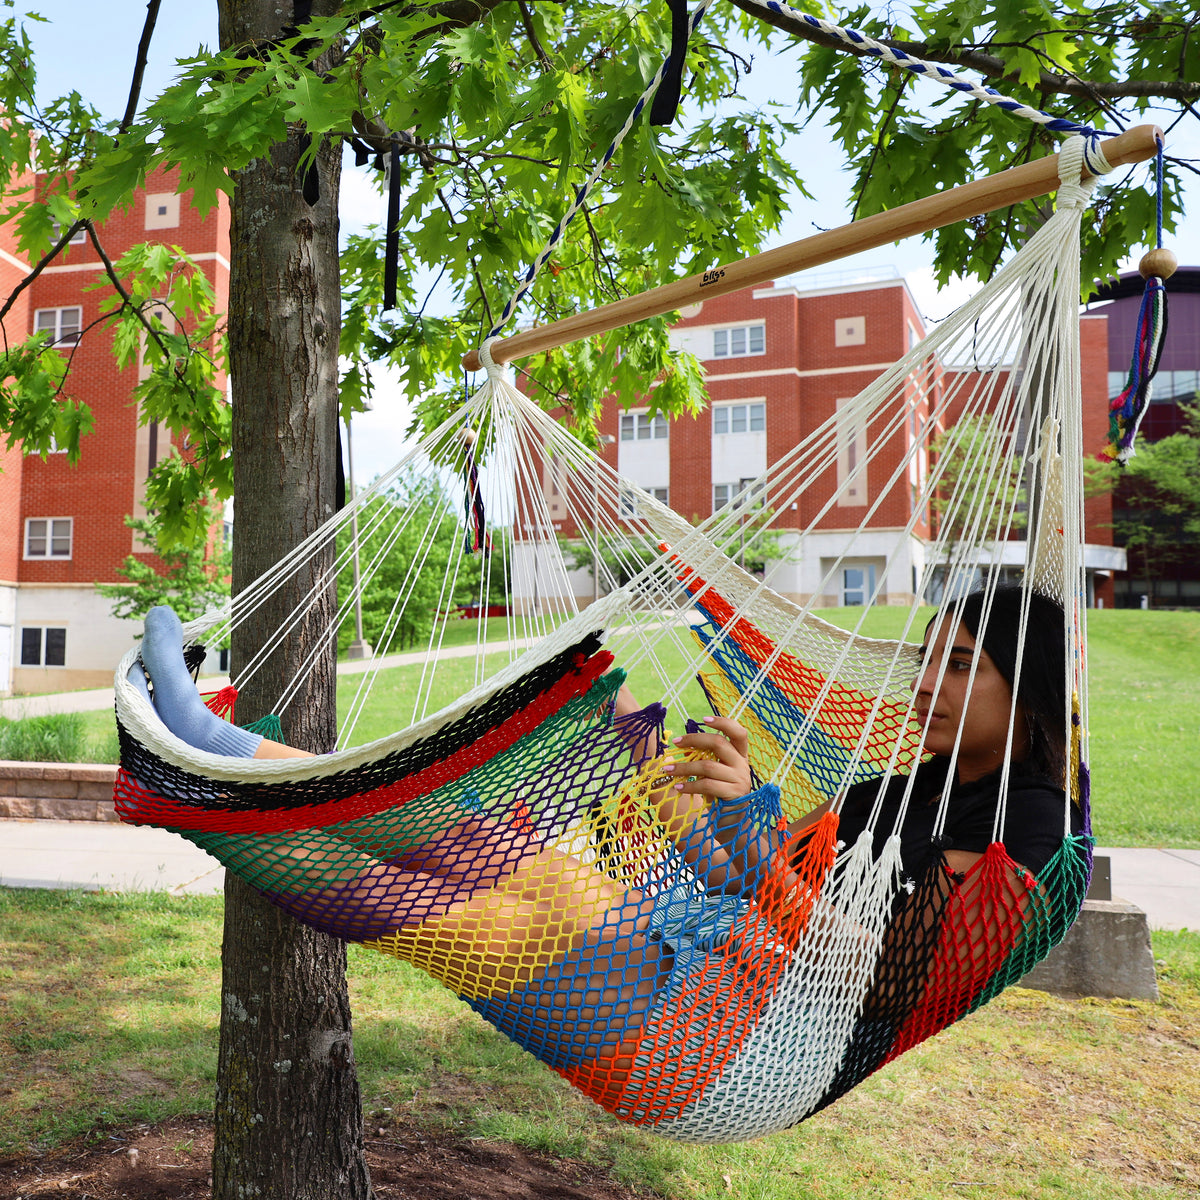 Girl relaxing in the Bliss Hammocks 40-inch Multi-color Island Rope Hammock Chair hanging from a tree.